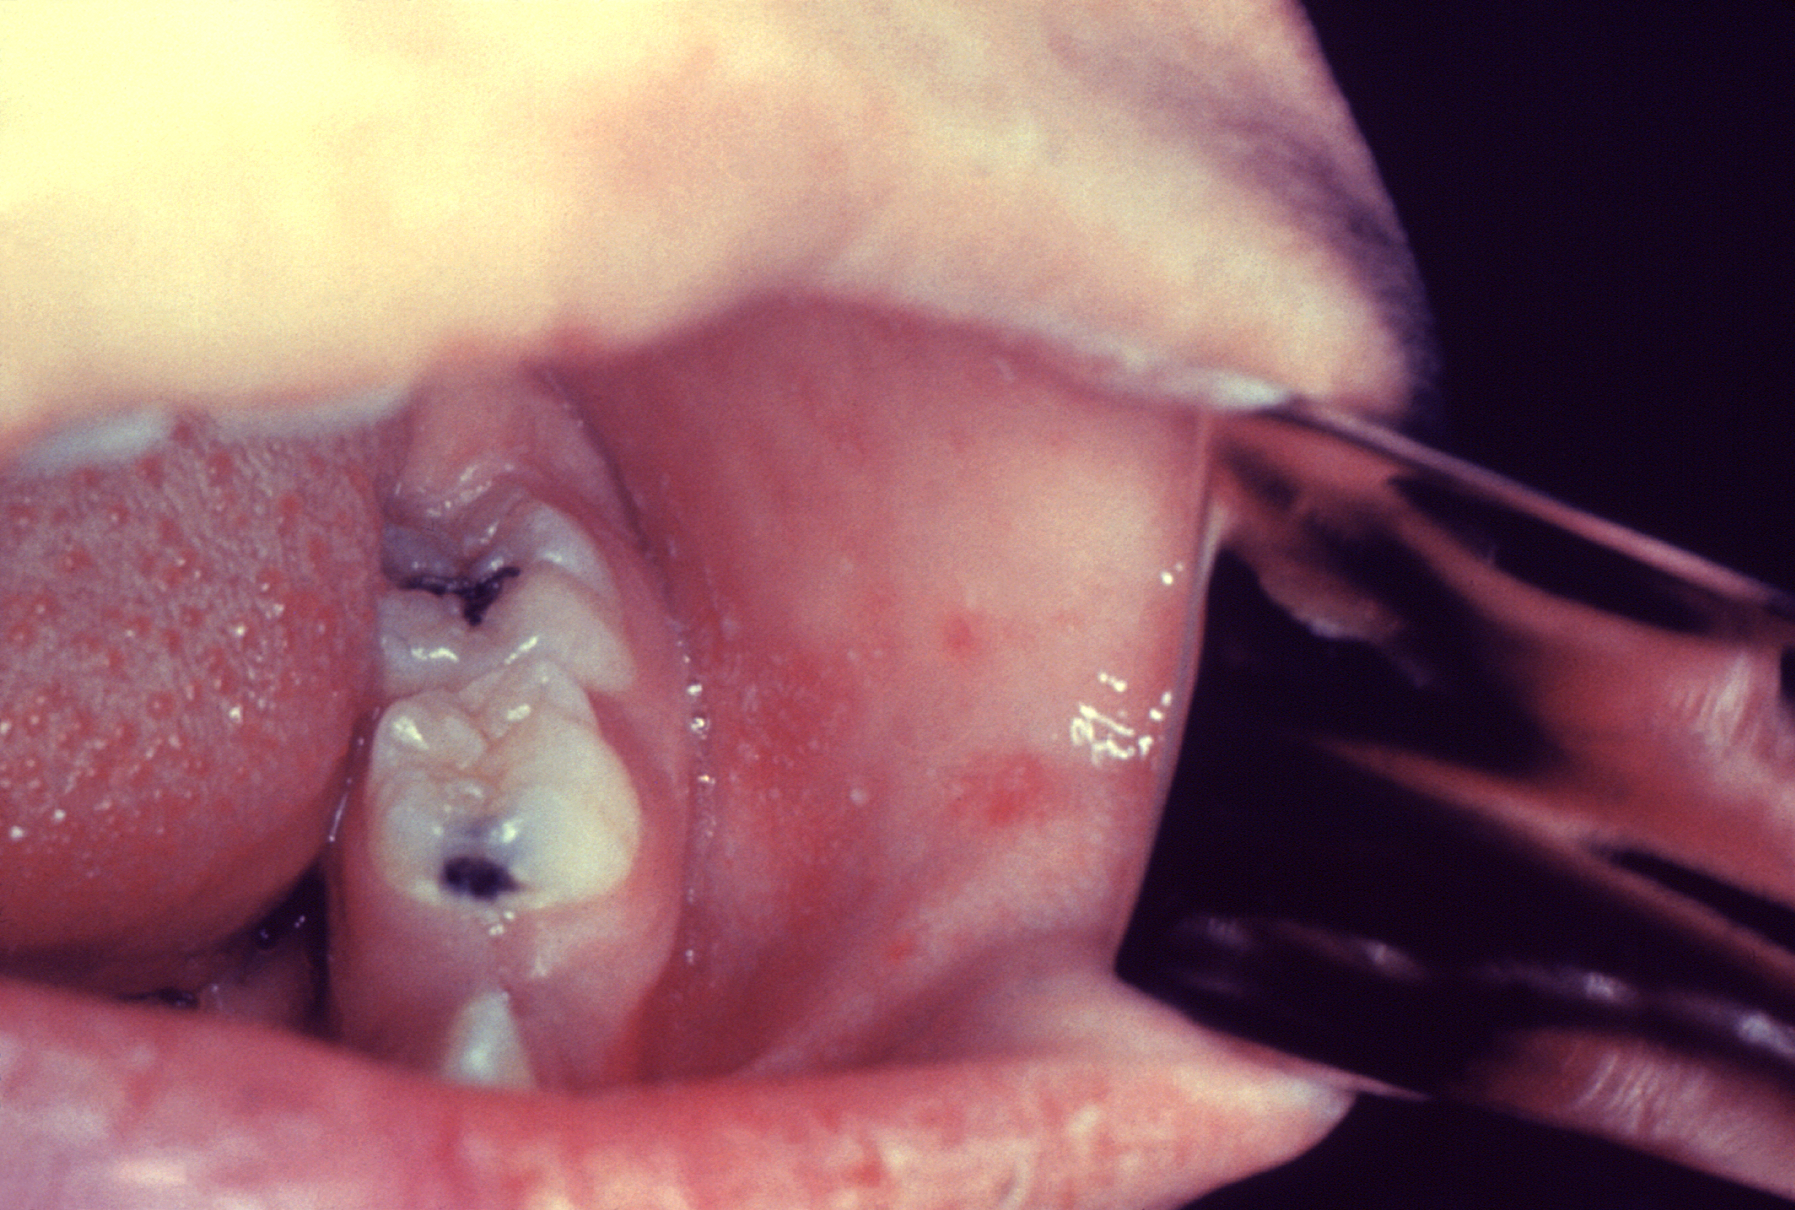 The image depicts Koplik spots on the buccal mucosa.